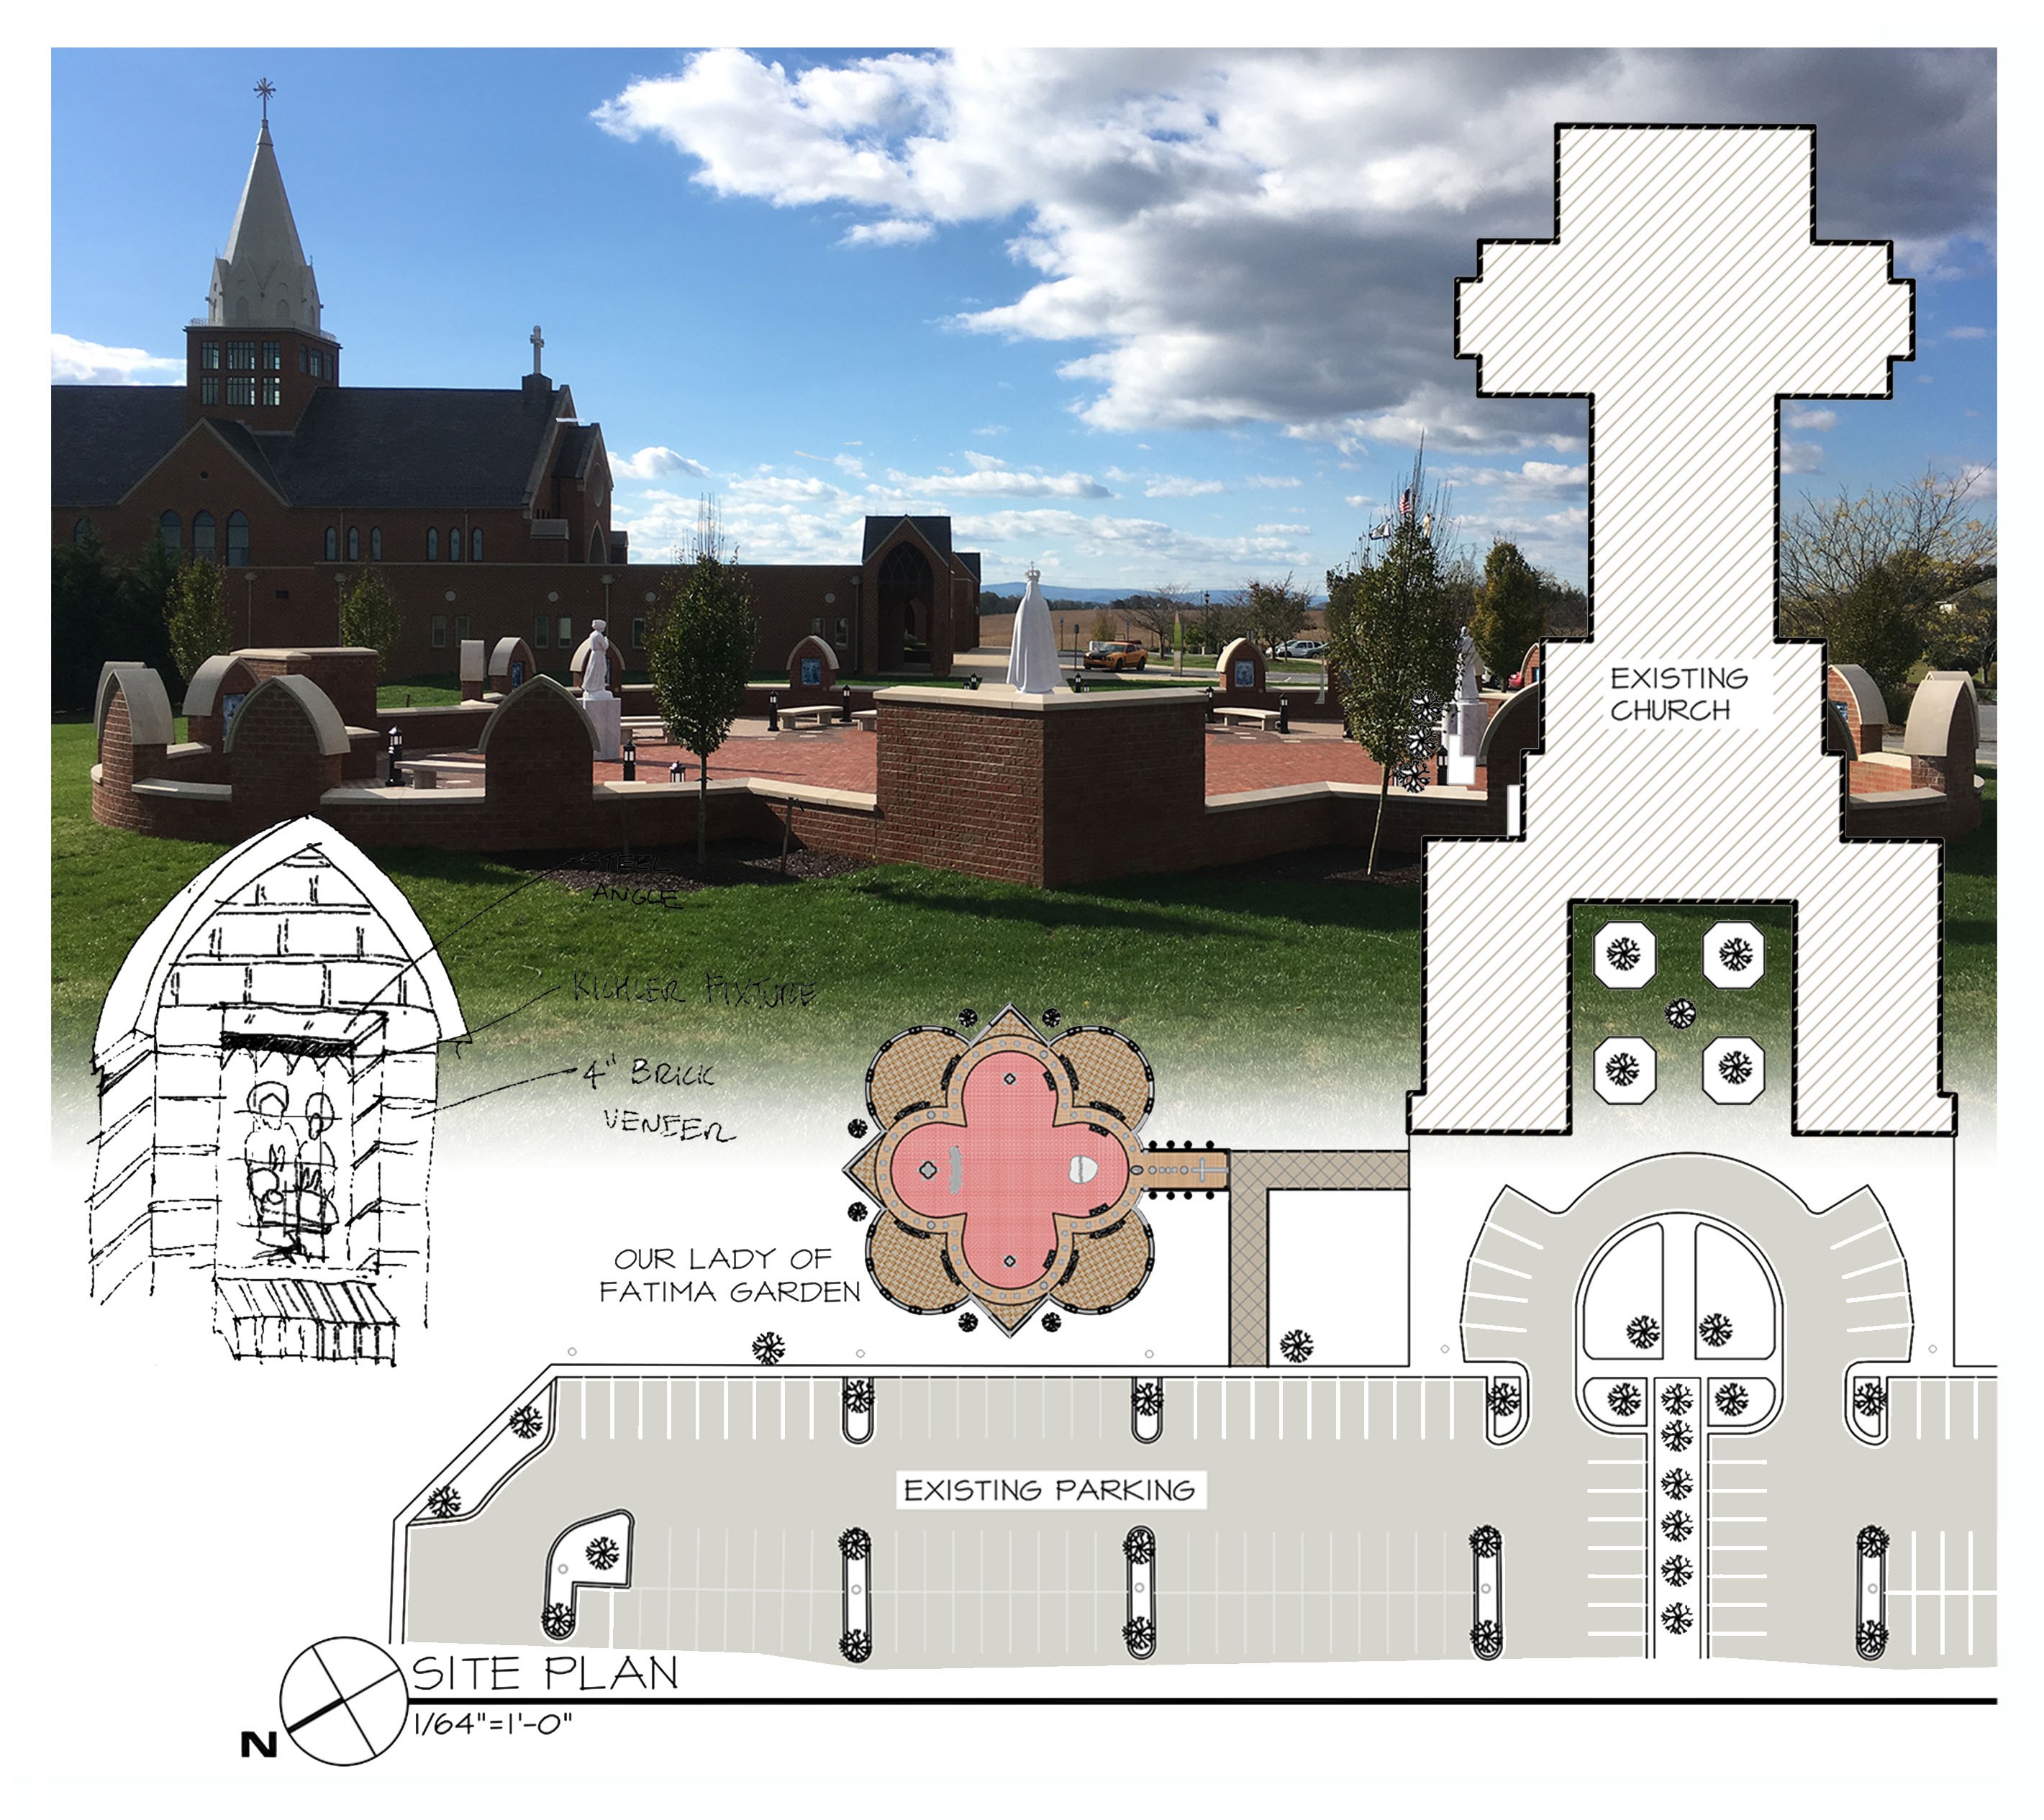 0730-5 St. James Catholic Church-Our Lady of Fatima Shrine Architectural Site Plan